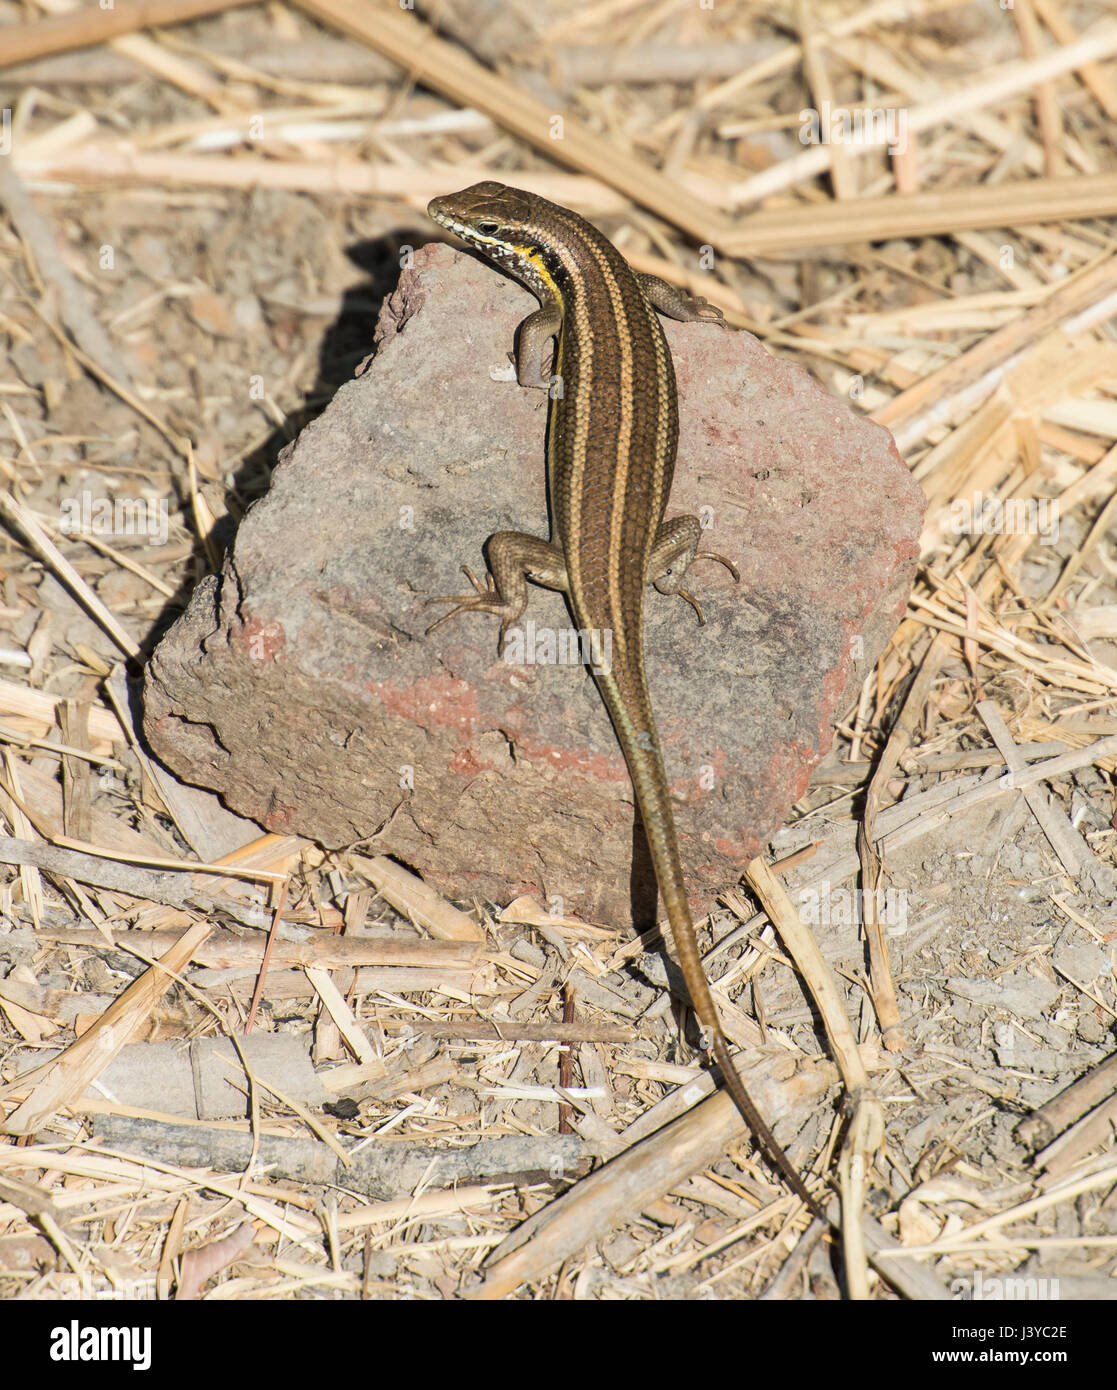 Blue-tailed skink lizard stood on a stone rock in rural countryside Stock Photo